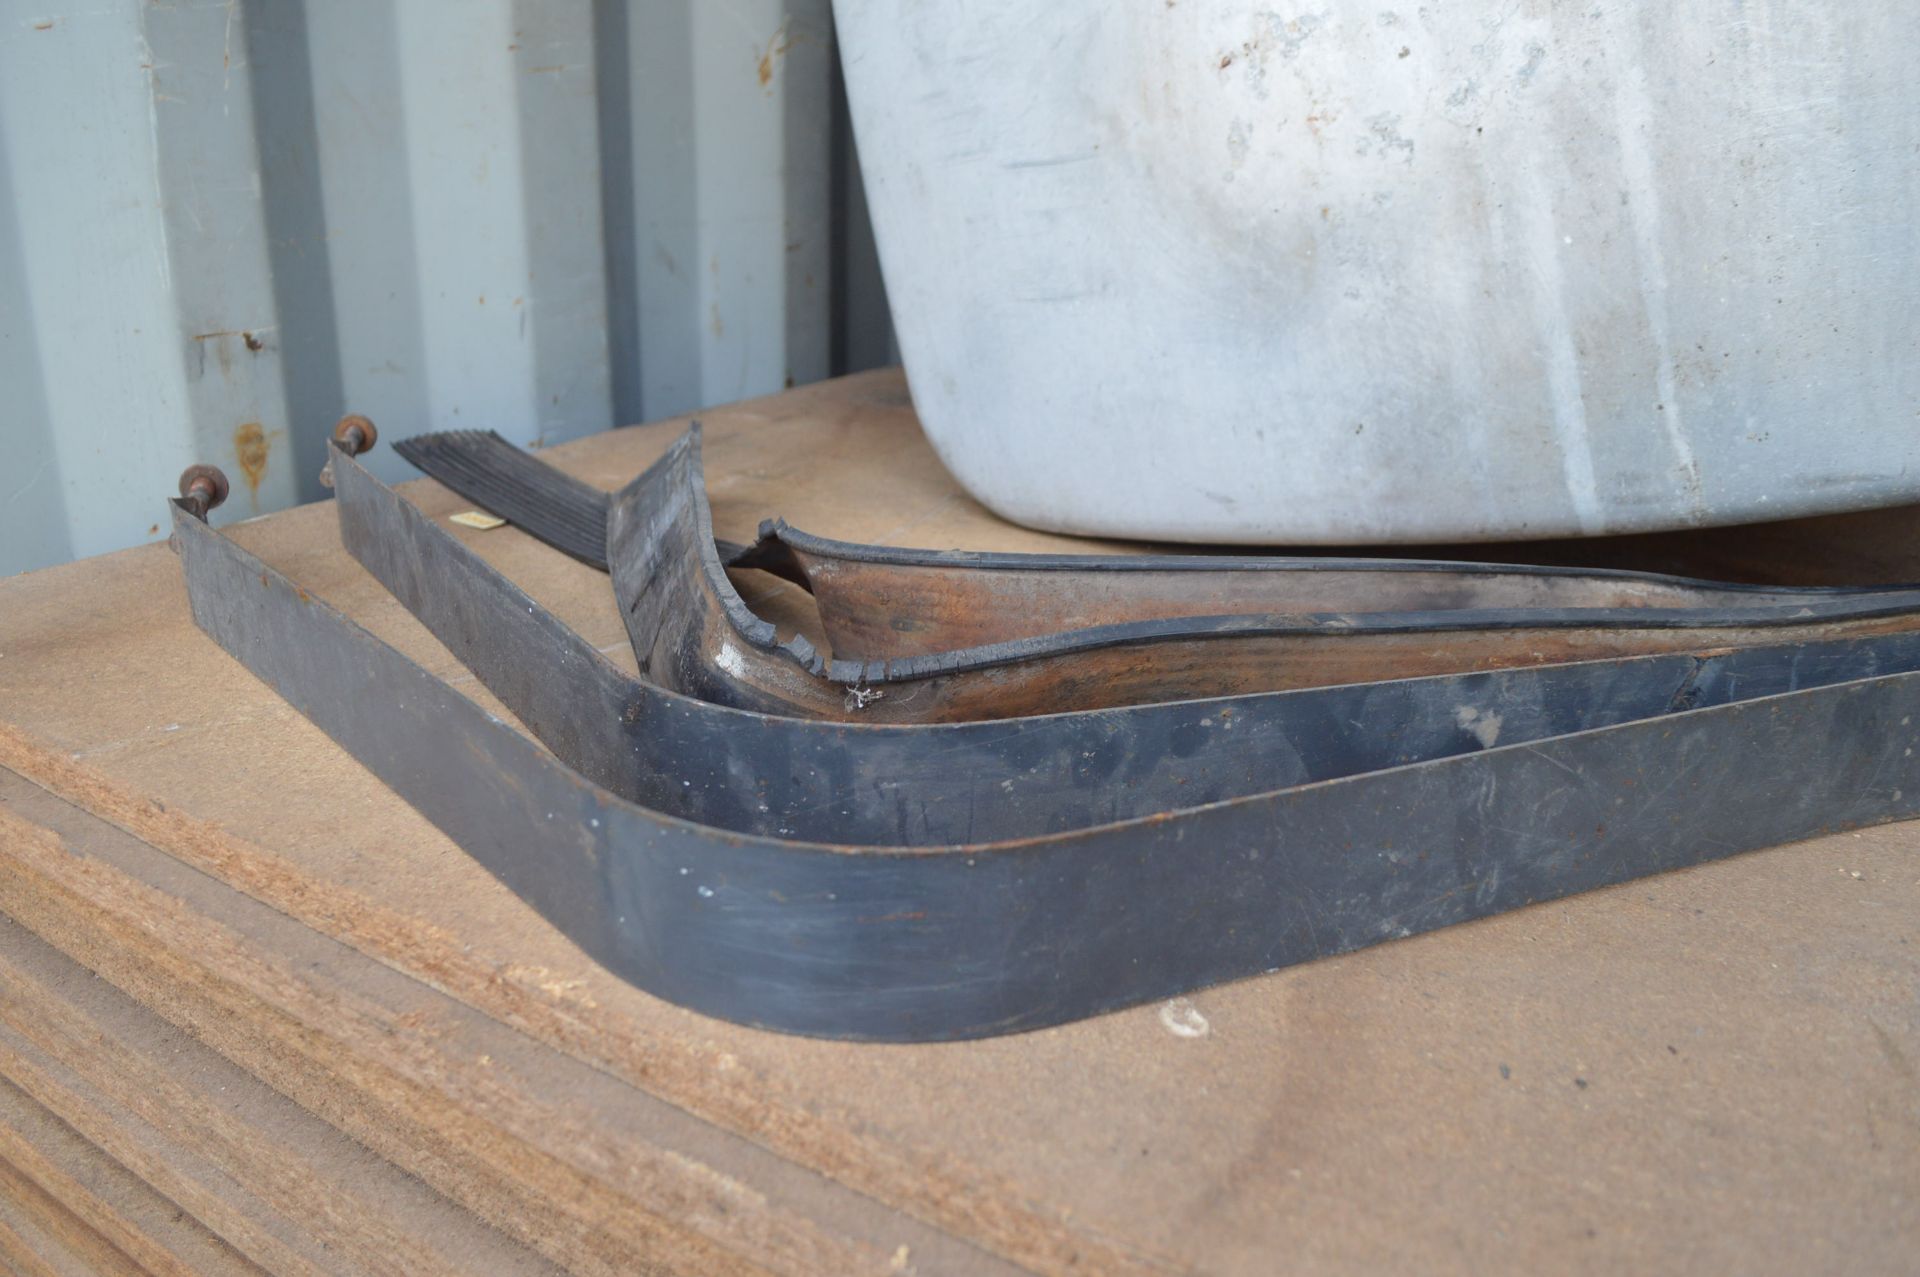 MERCEDES ALUMINIUM FUEL TANK - RUBBER STRAP/FIXINGS INCLUDED  - NR   HEIGHT: 540MM WIDTH: 630MM - Image 7 of 7